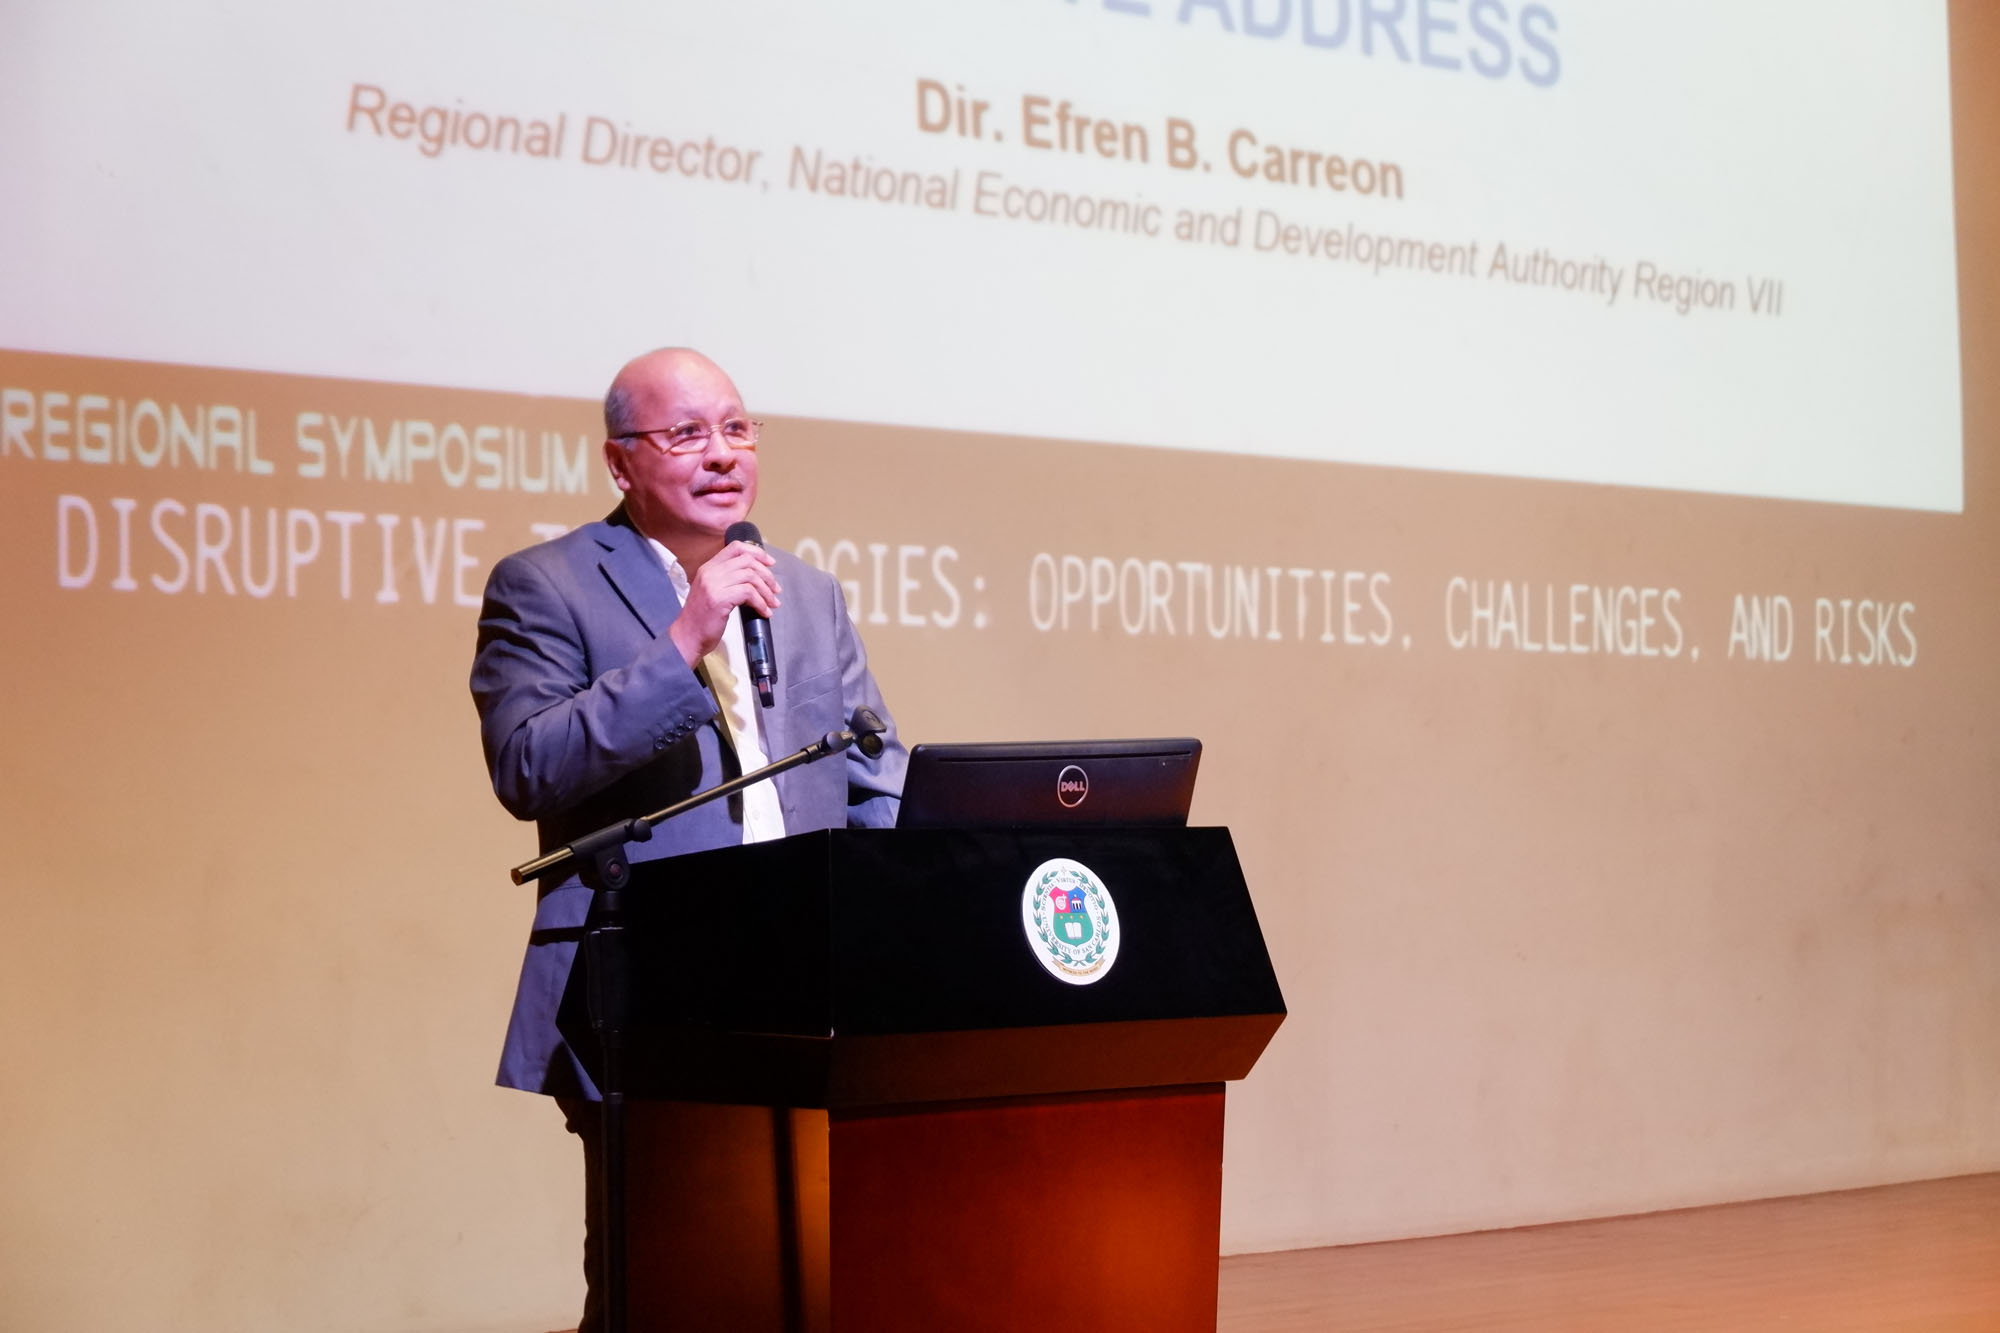 PASCN Regional Symposium on Disruptive Technologies: Opportunities, Challenges, and Risks-pascn-usc-15-20190123.jpg